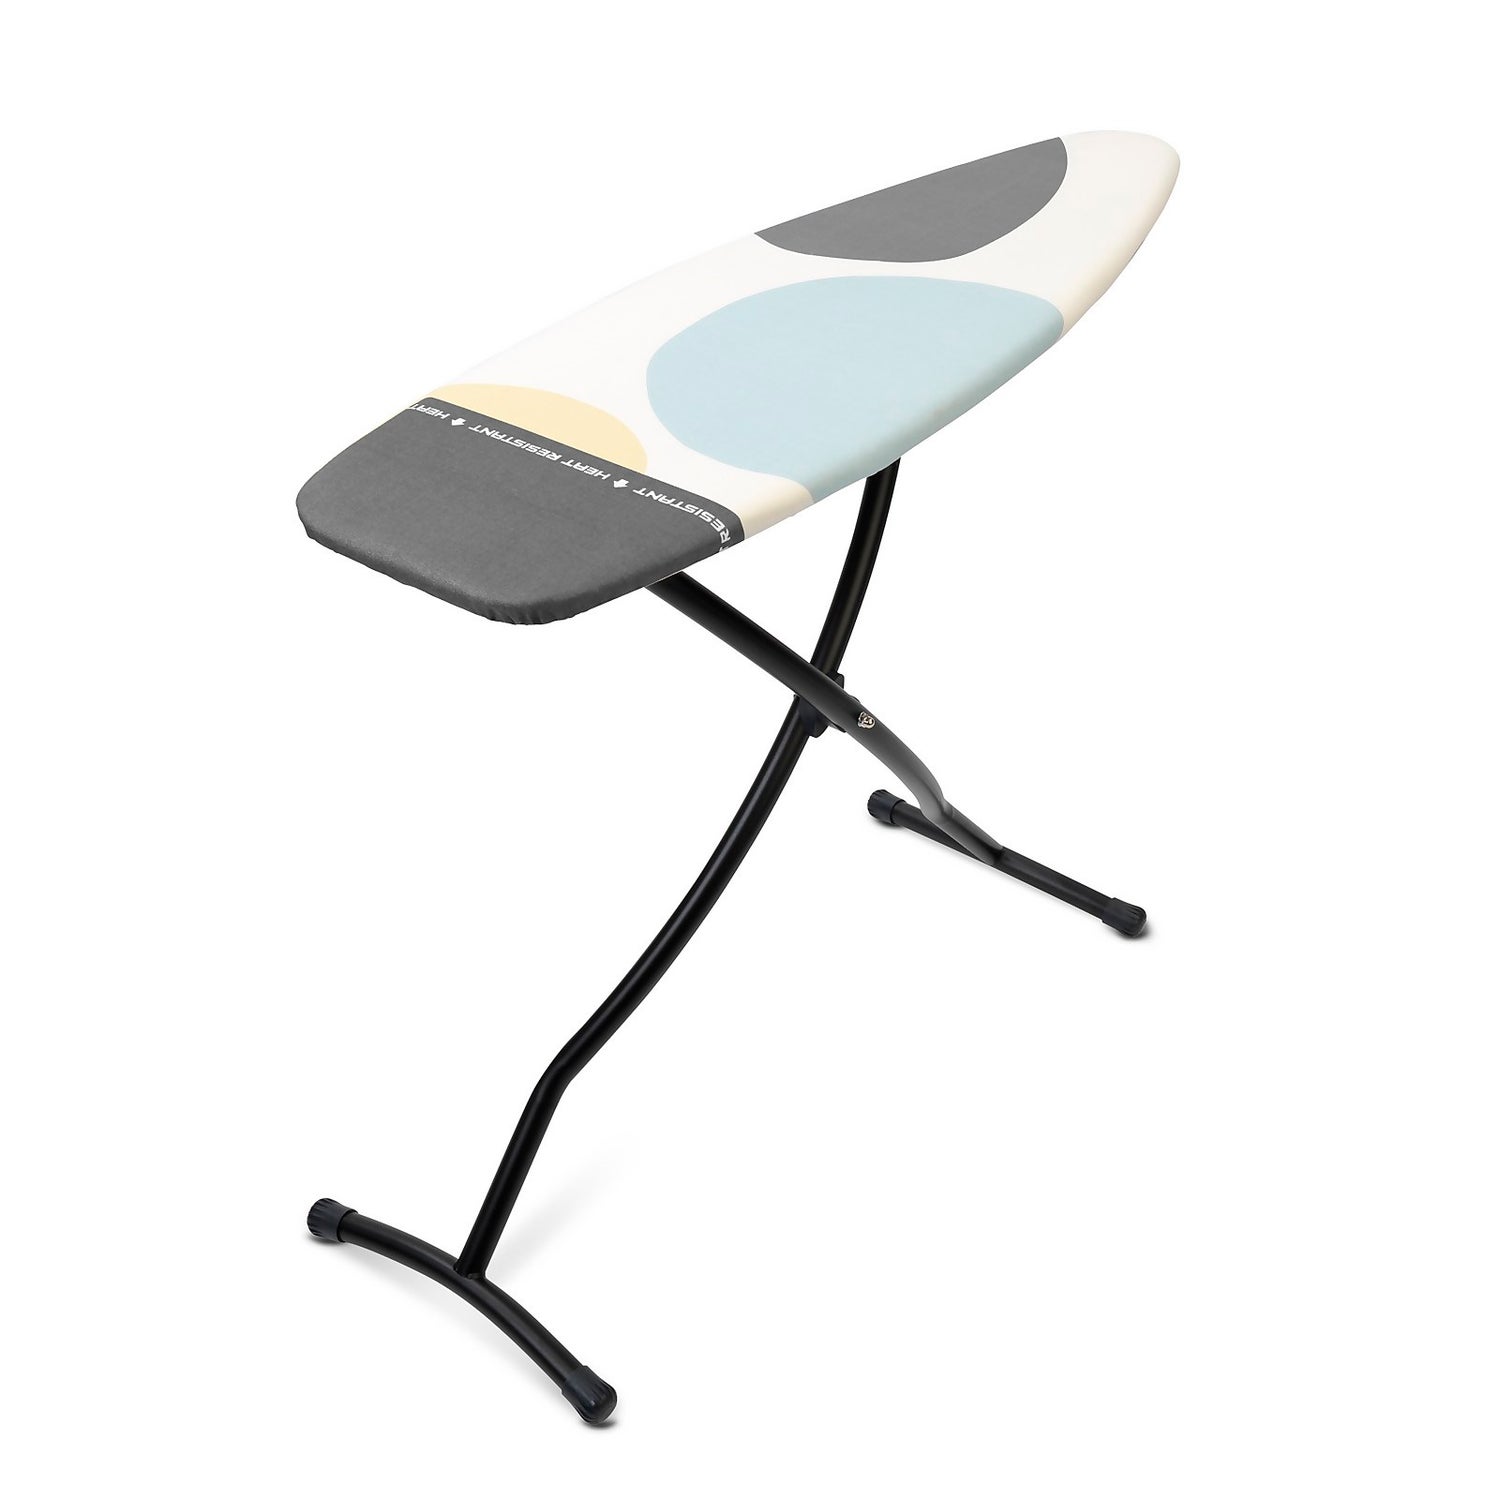 Size D Extra Brabantia Brabantia Ironing Board Cover with Parking Zone with Fasteners 